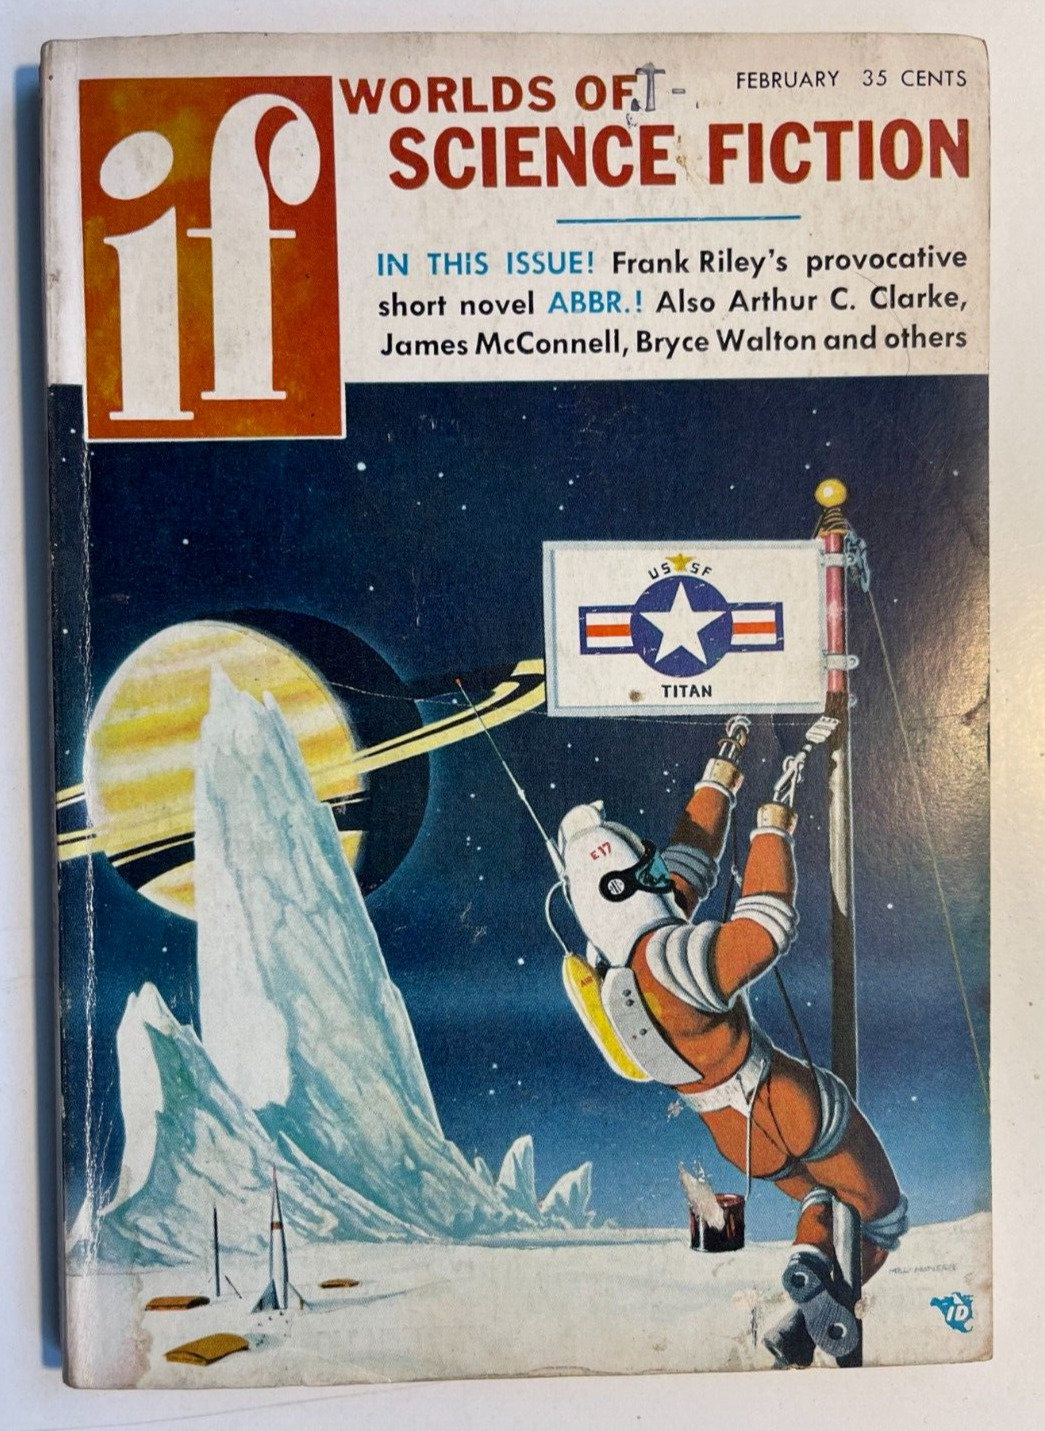 IF Worlds of SCIENCE FICTION digest Vol 7, no. 2 FEB 1957  Cover MEL HUNTER